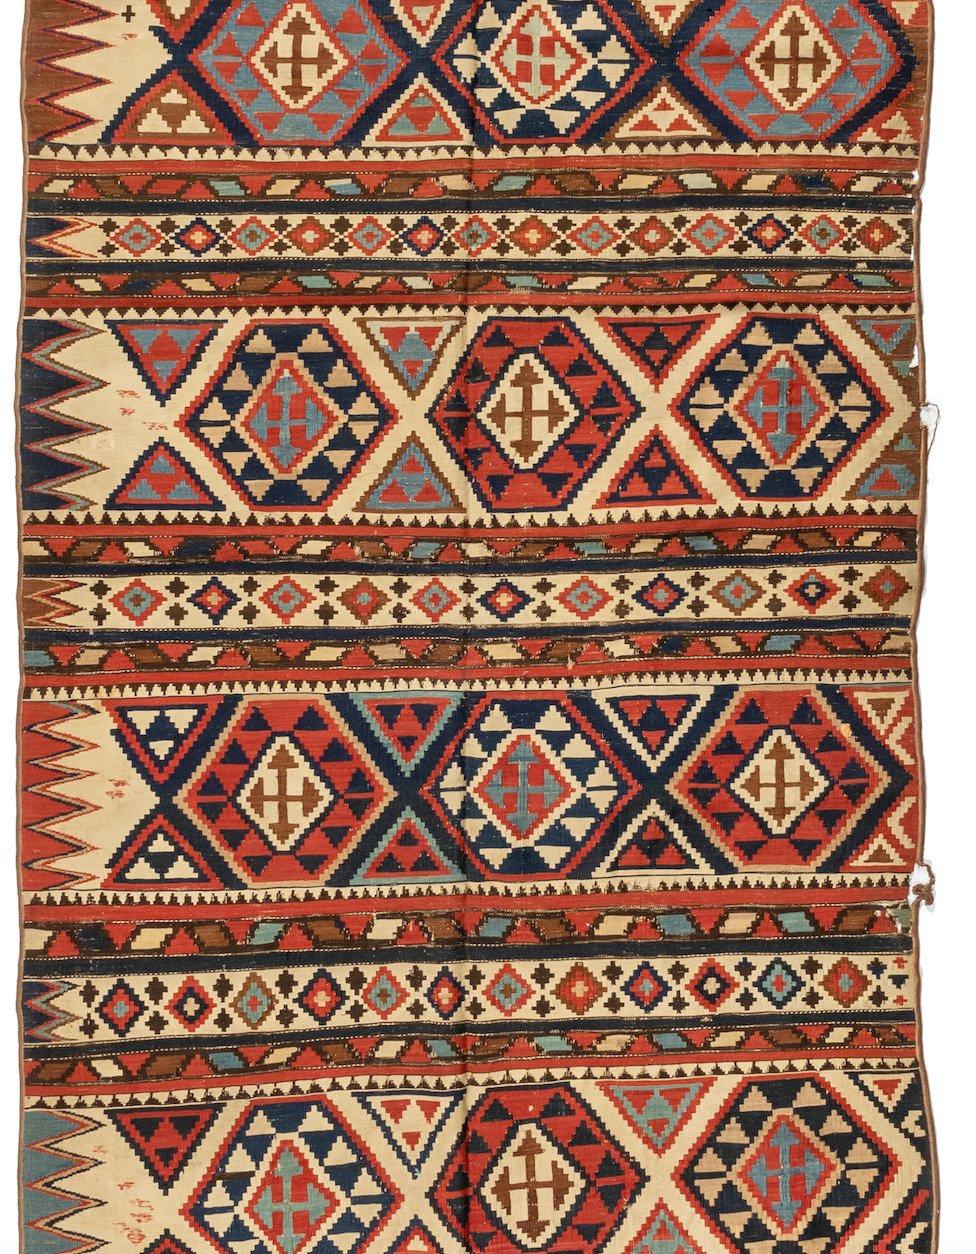 Kilim, a word of Turkish origin, denotes a pileless textile of many uses produced by one of several flat-weaving techniques that have a common or closely related heritage and are practiced in the geographical area that includes parts of Turkey